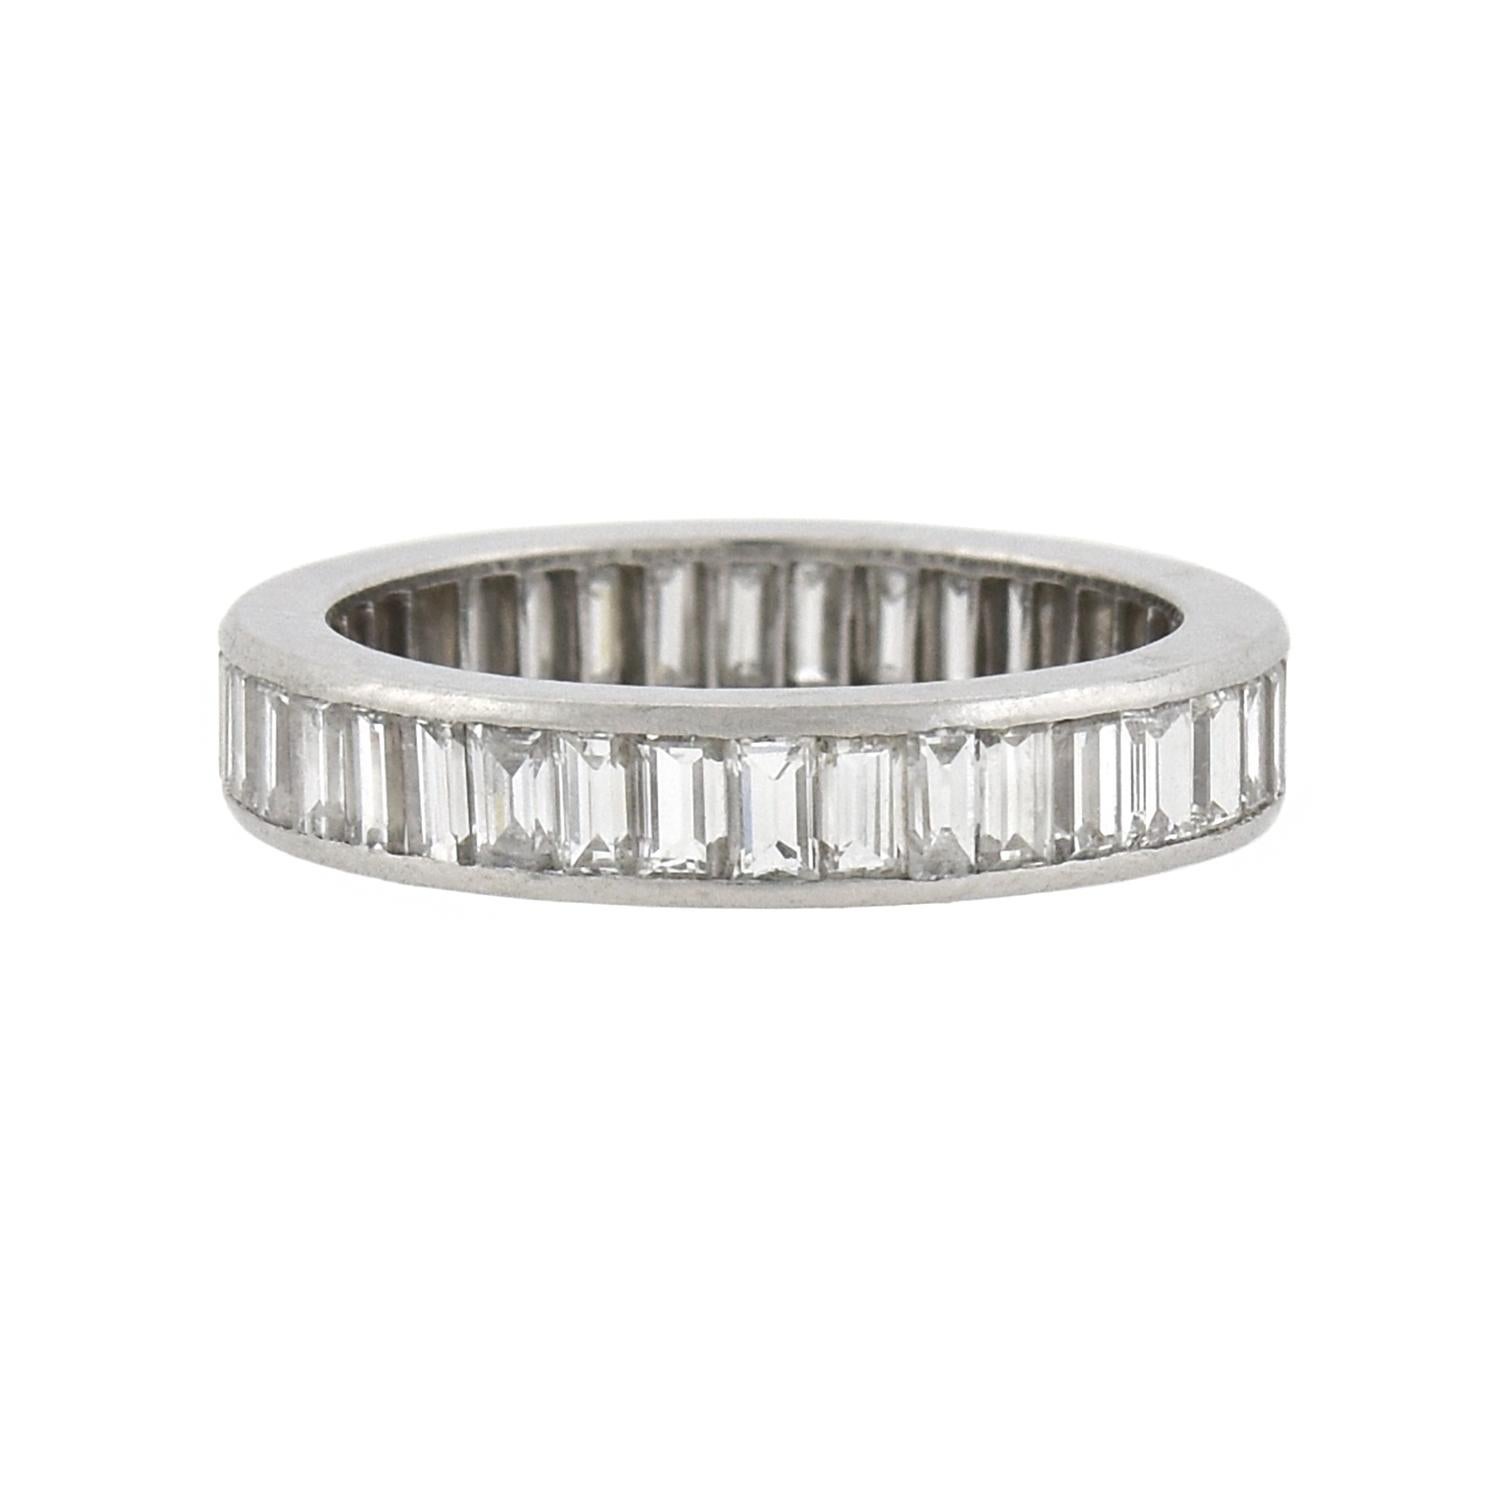 A stunning diamond eternity band from the Retro (ca1940) era! This gorgeous piece is crafted in platinum and features of a single row of Baguette Cut diamonds, all held within a smooth channel setting. Collectively, the diamonds weigh approximately